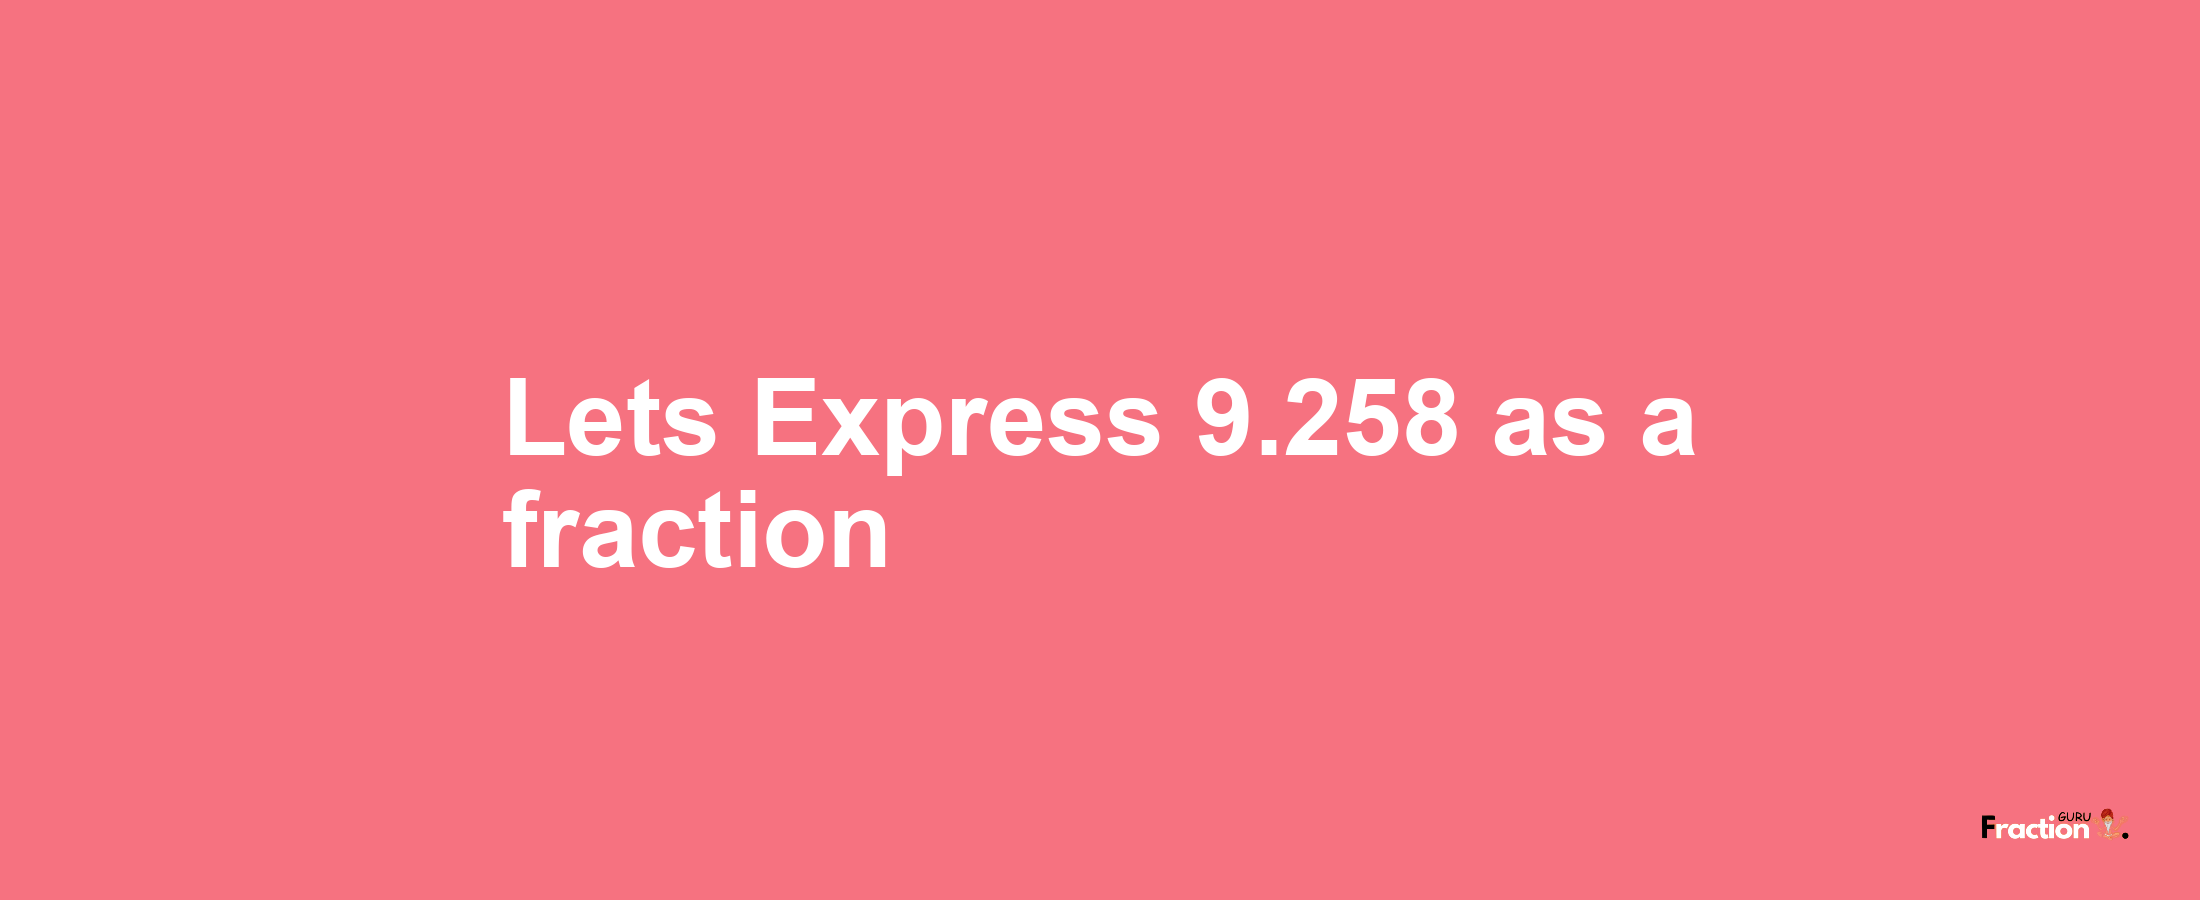 Lets Express 9.258 as afraction